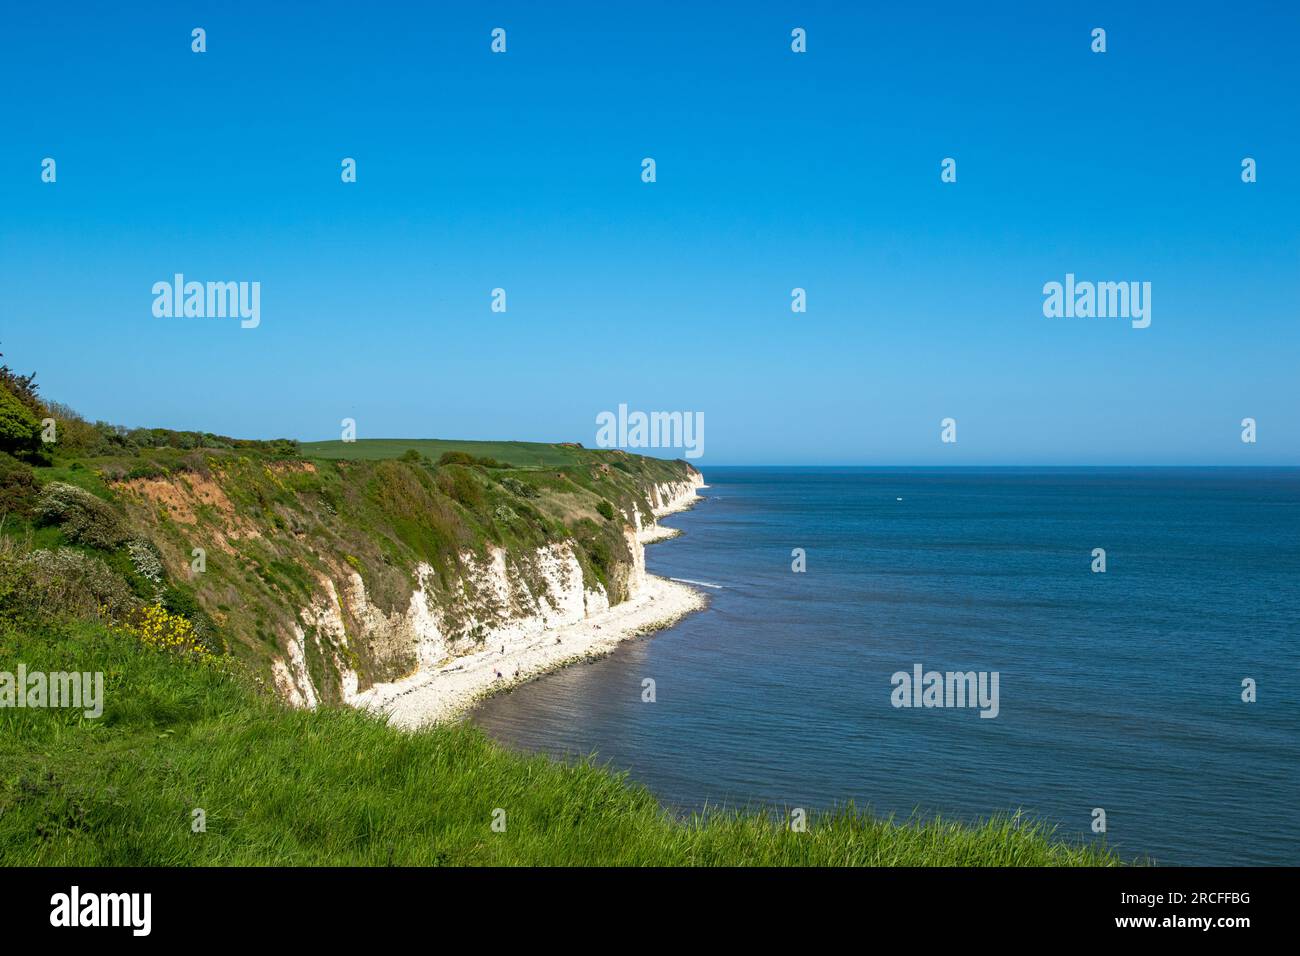 Beautiful view footage taken with the camera in Flamborough Stock Photo